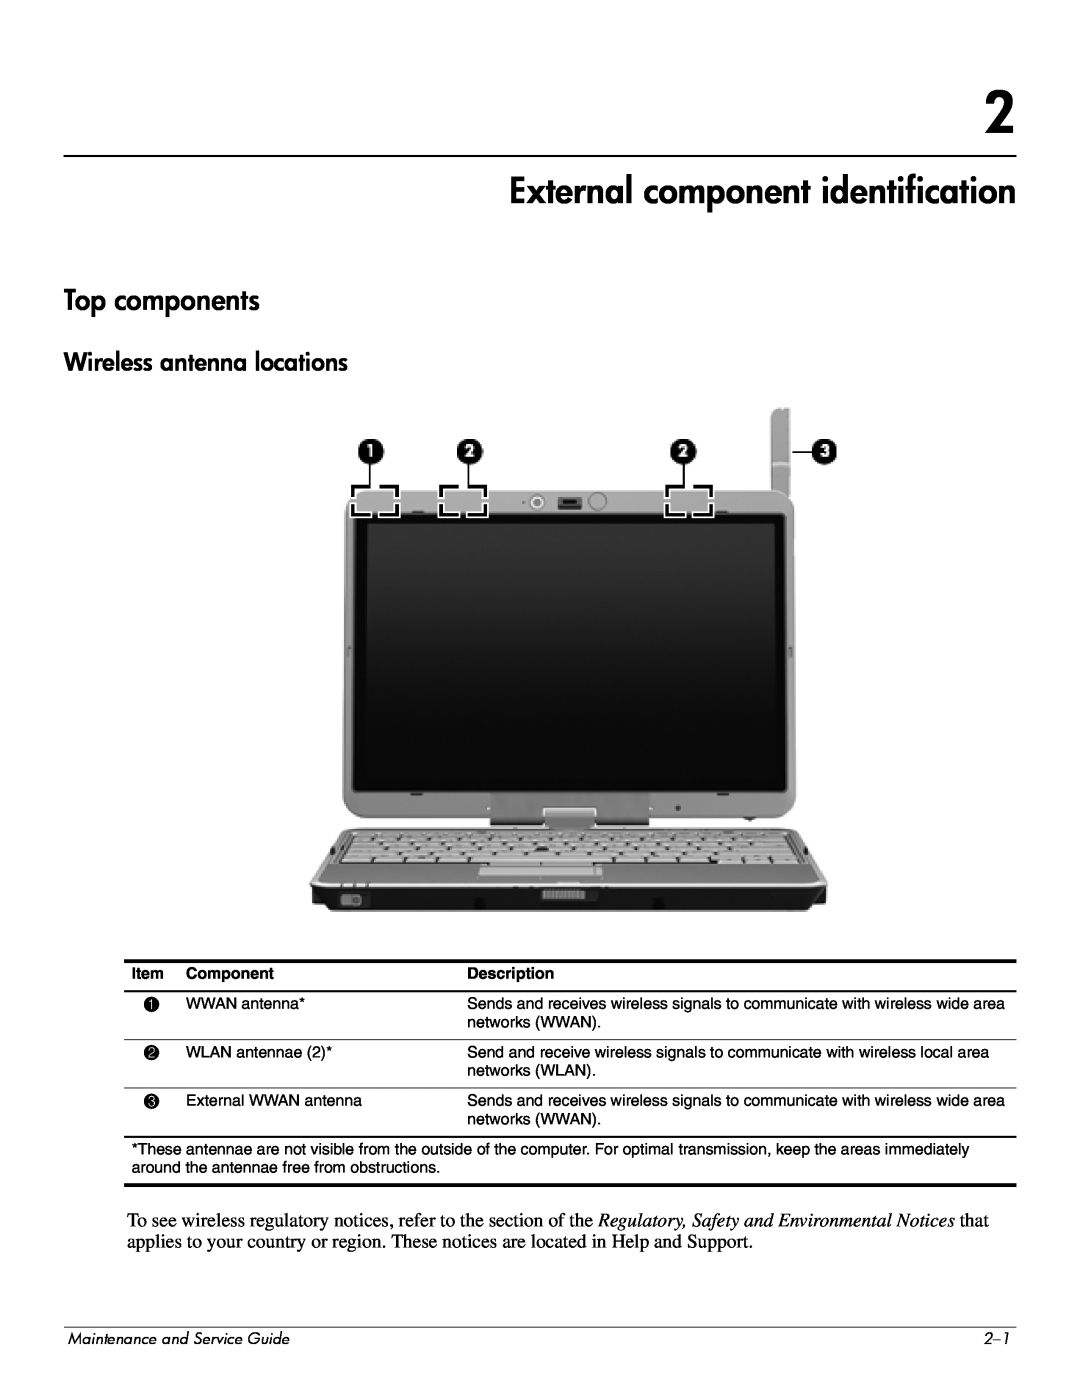 Hitachi 2730P manual External component identification, Top components, Wireless antenna locations 